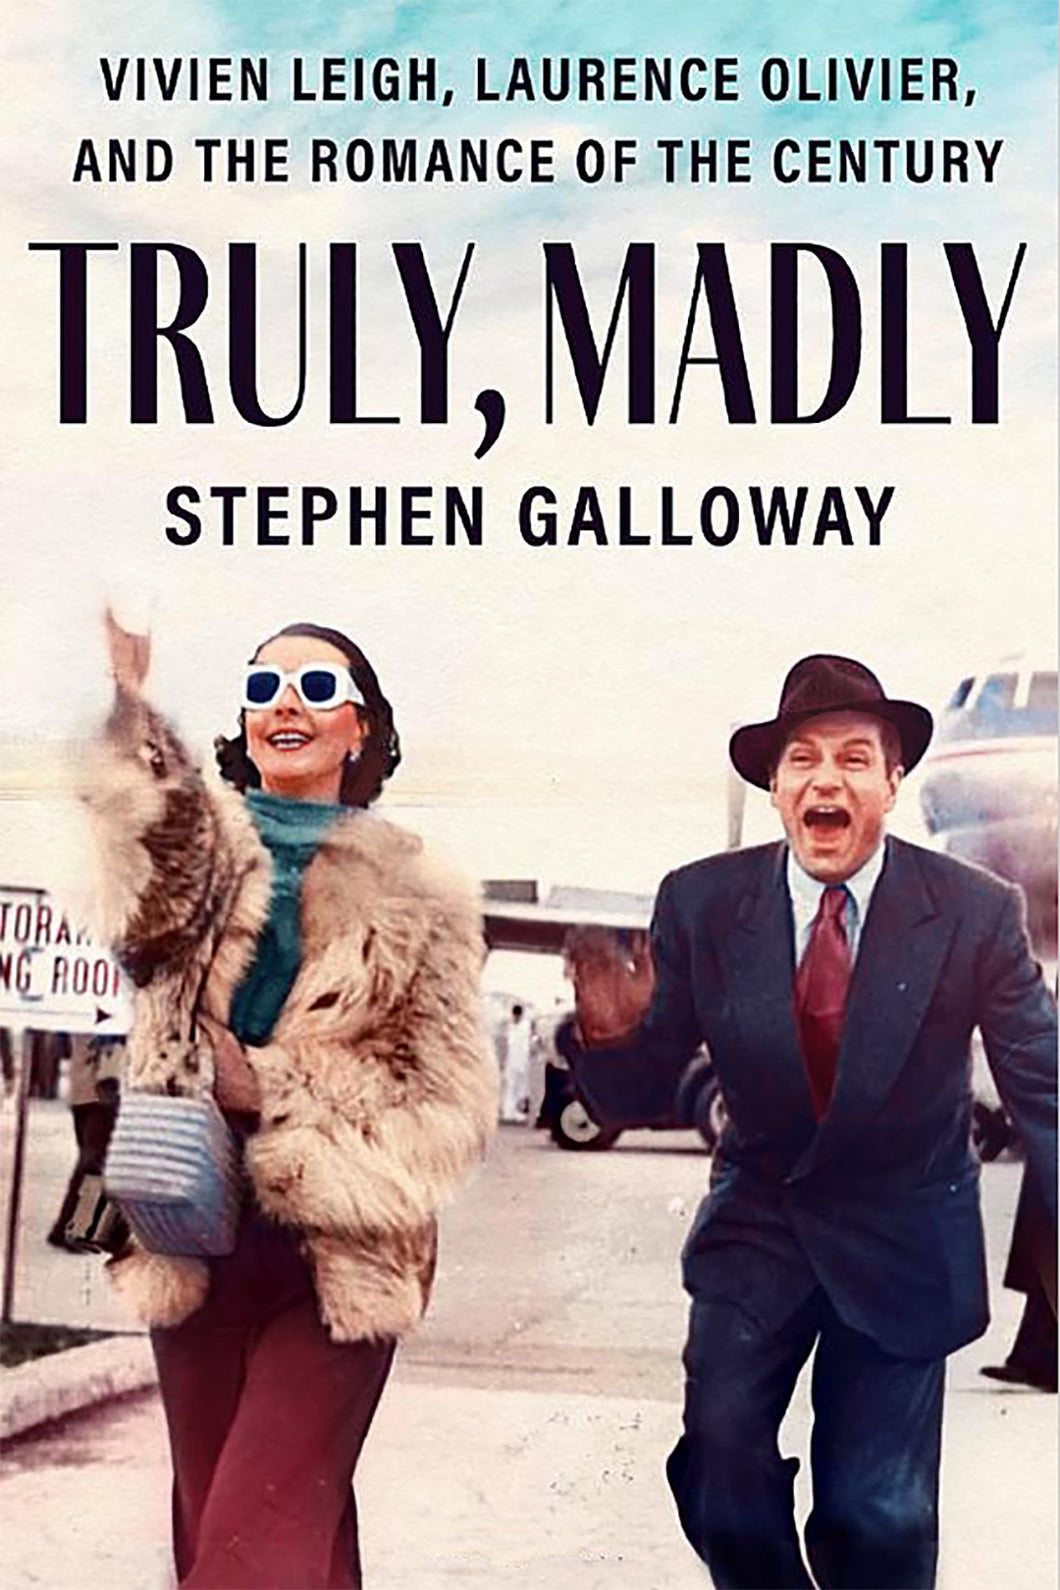 Truly, Madly: Vivien Leigh, Laurence Olivier, and the Romance of the Century by Stephen Galloway / Hardcover - NEW BOOK OR BOOK BOX